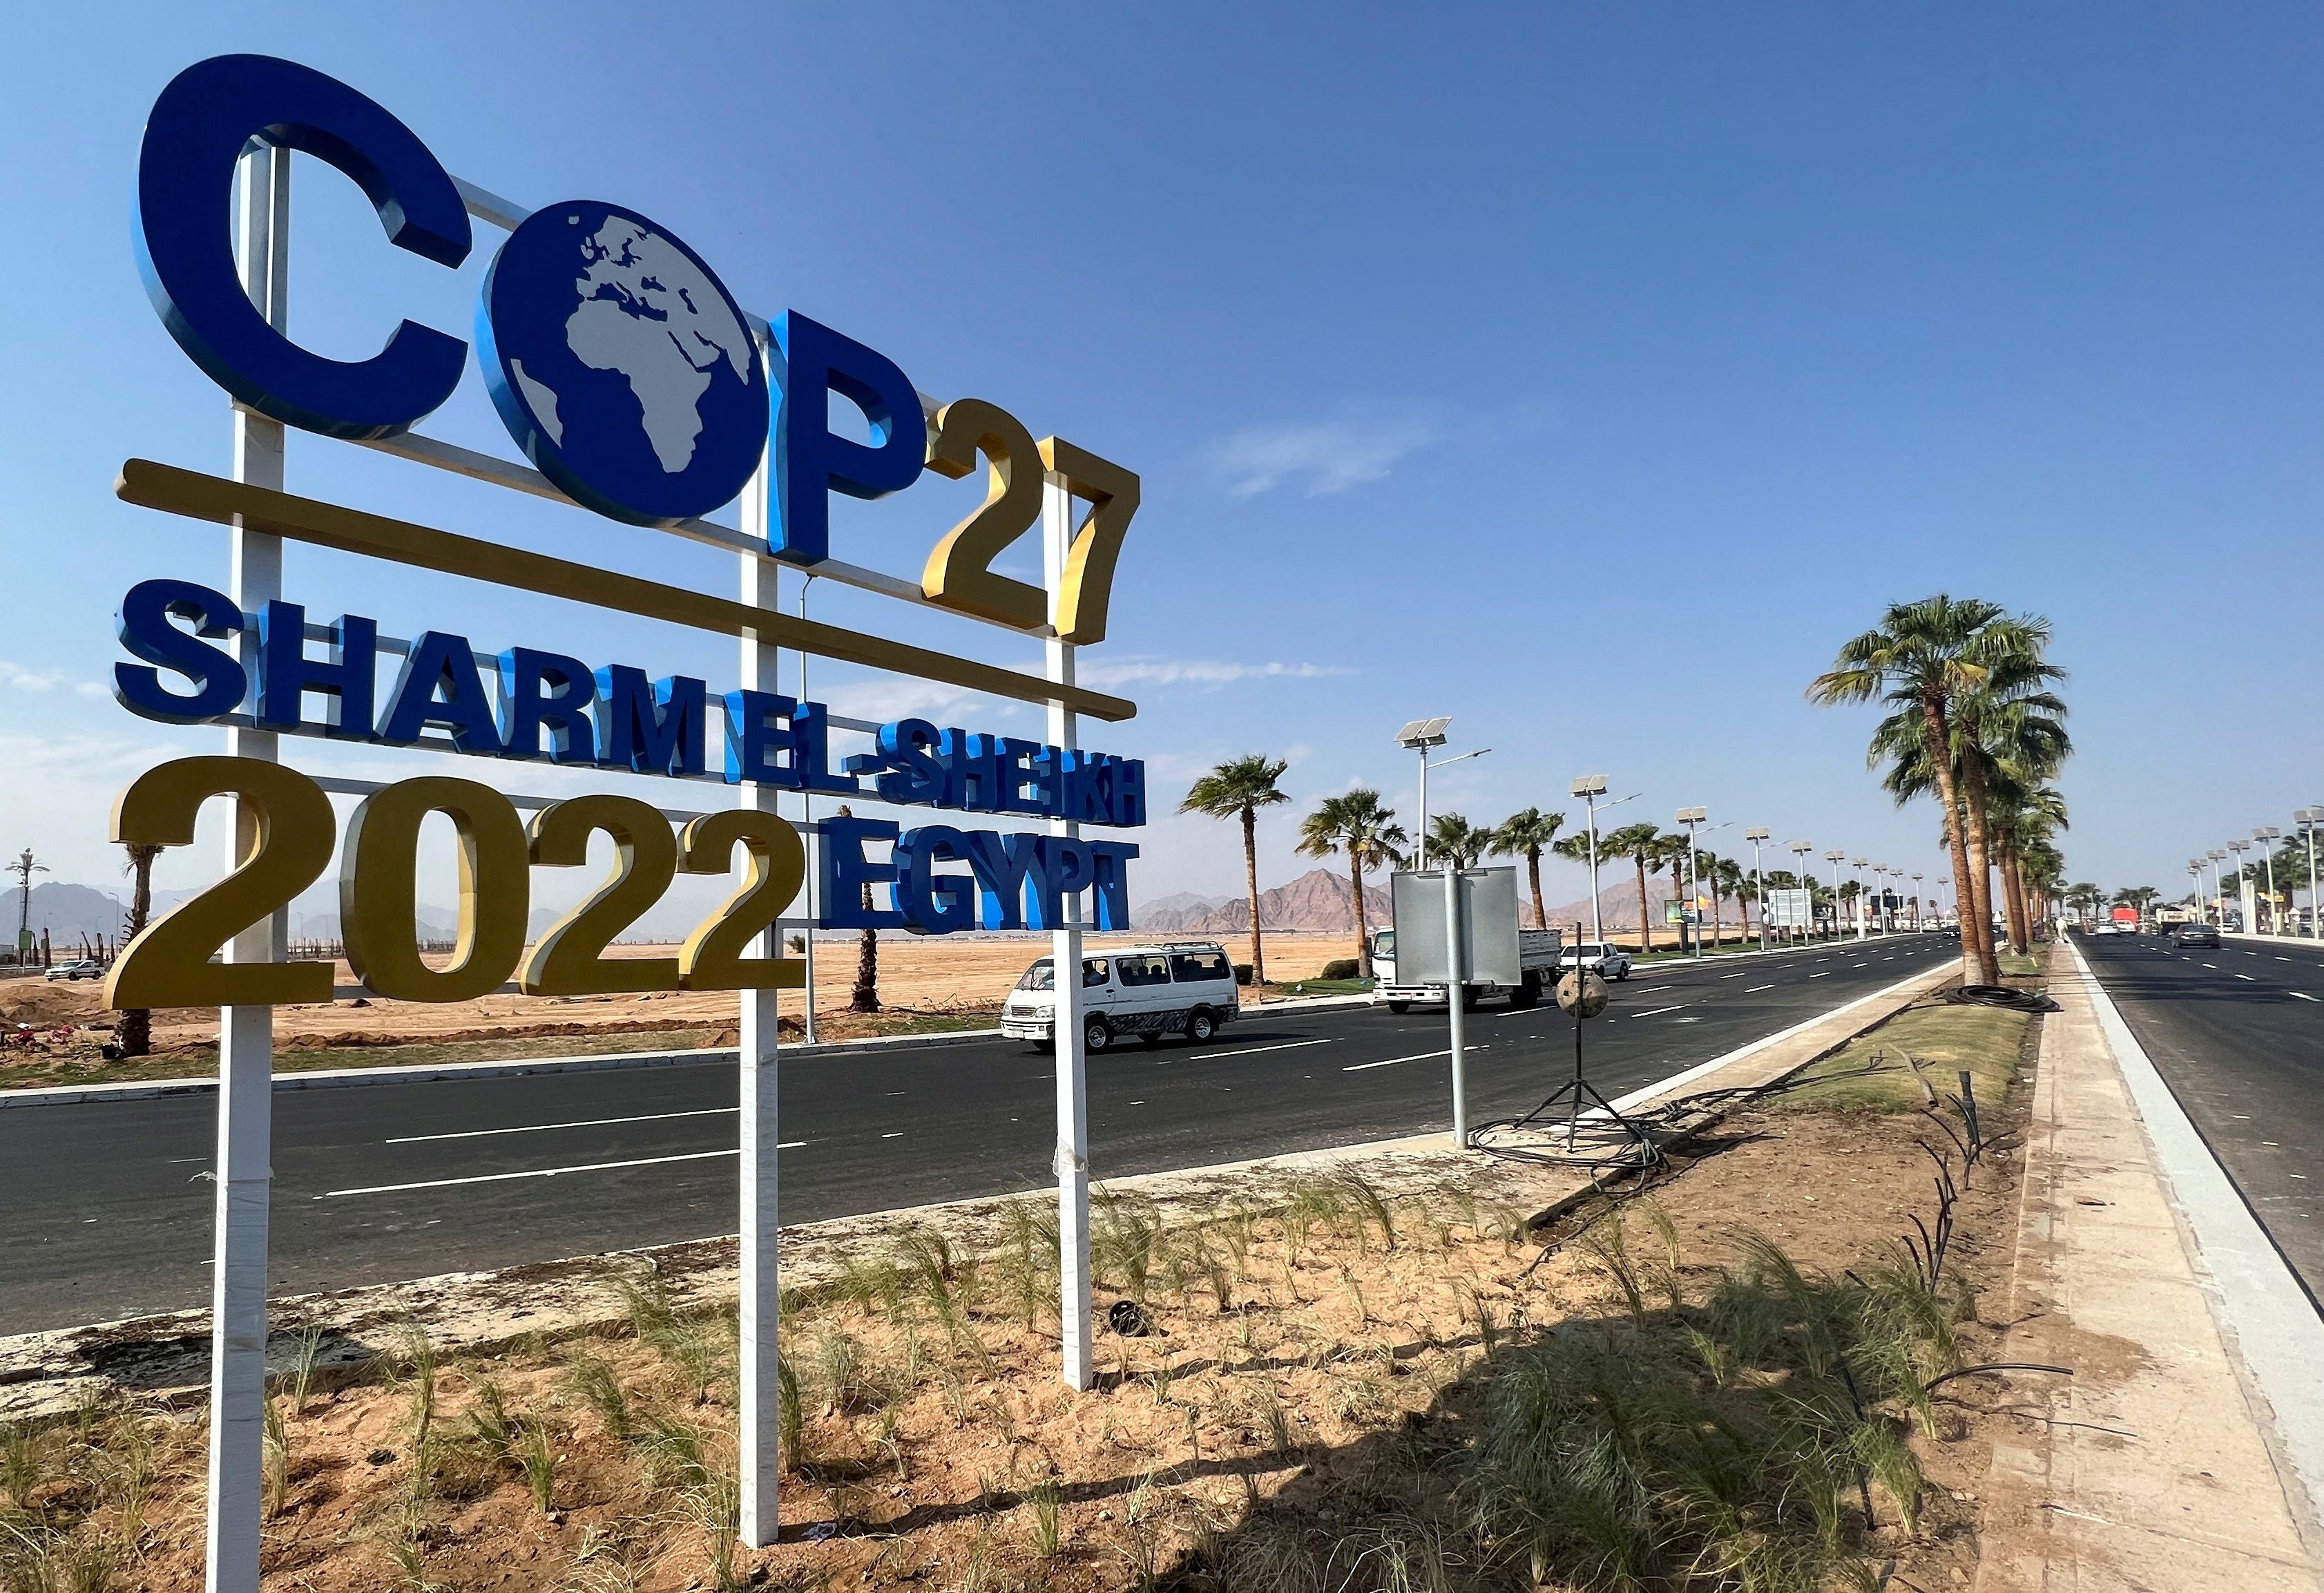 A Cop27 sign on the road leading to the conference area in Egypt’s Red Sea resort of Sharm el-Sheikh